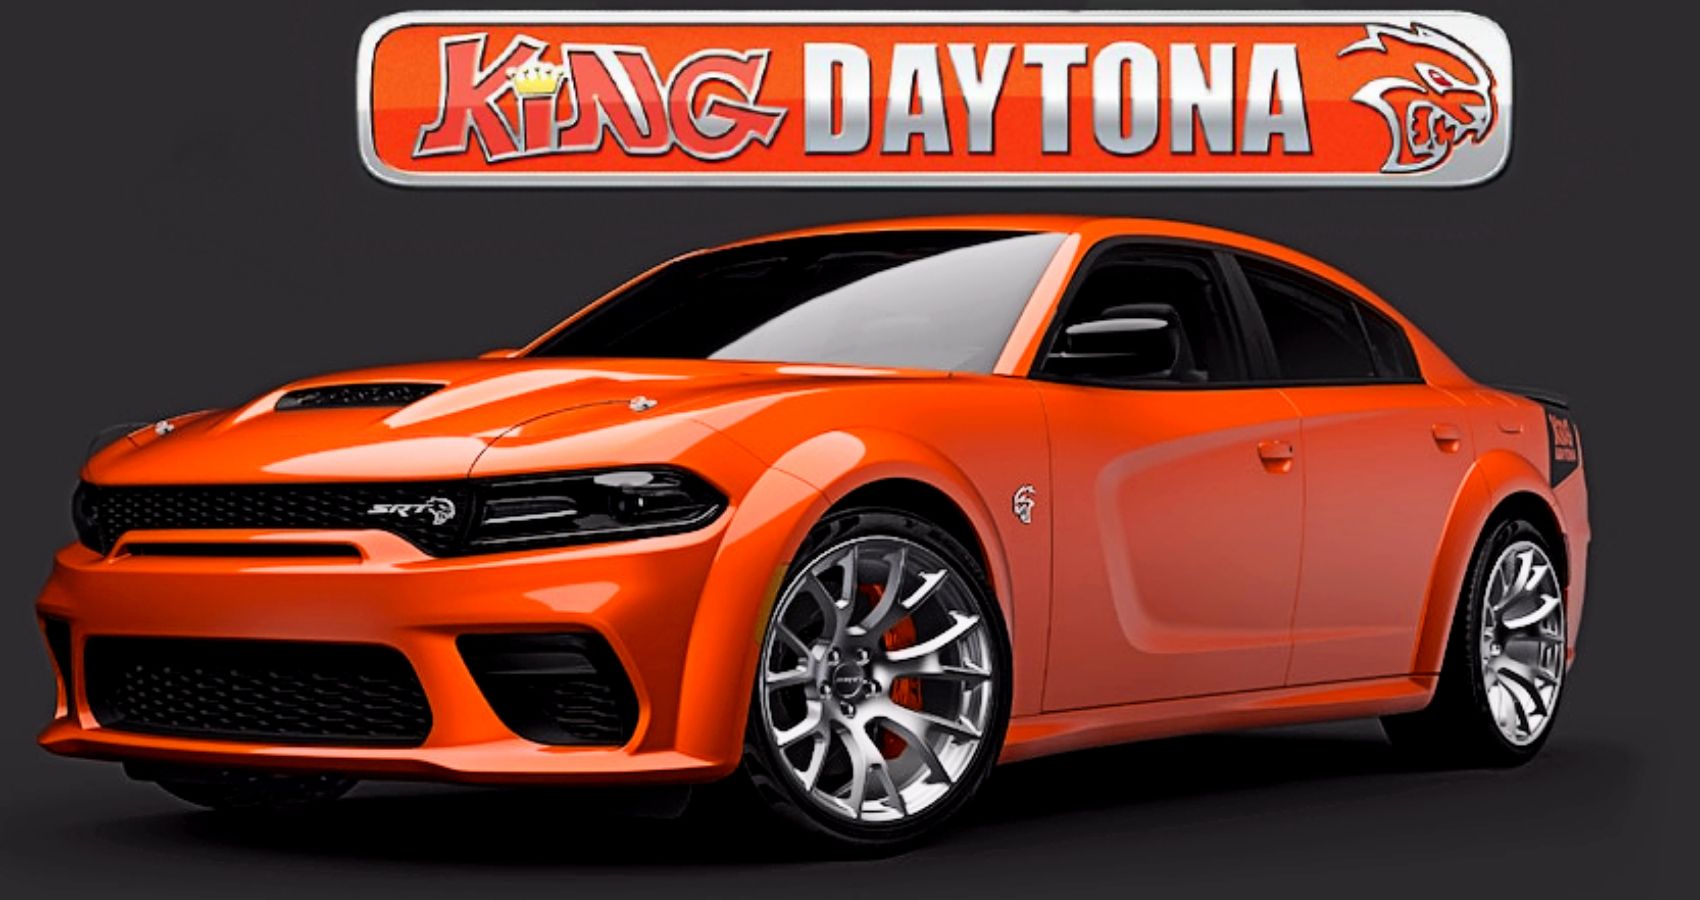 2023 Dodge Charger King Daytona Special Edition Honors An Iconic 60s Racecar